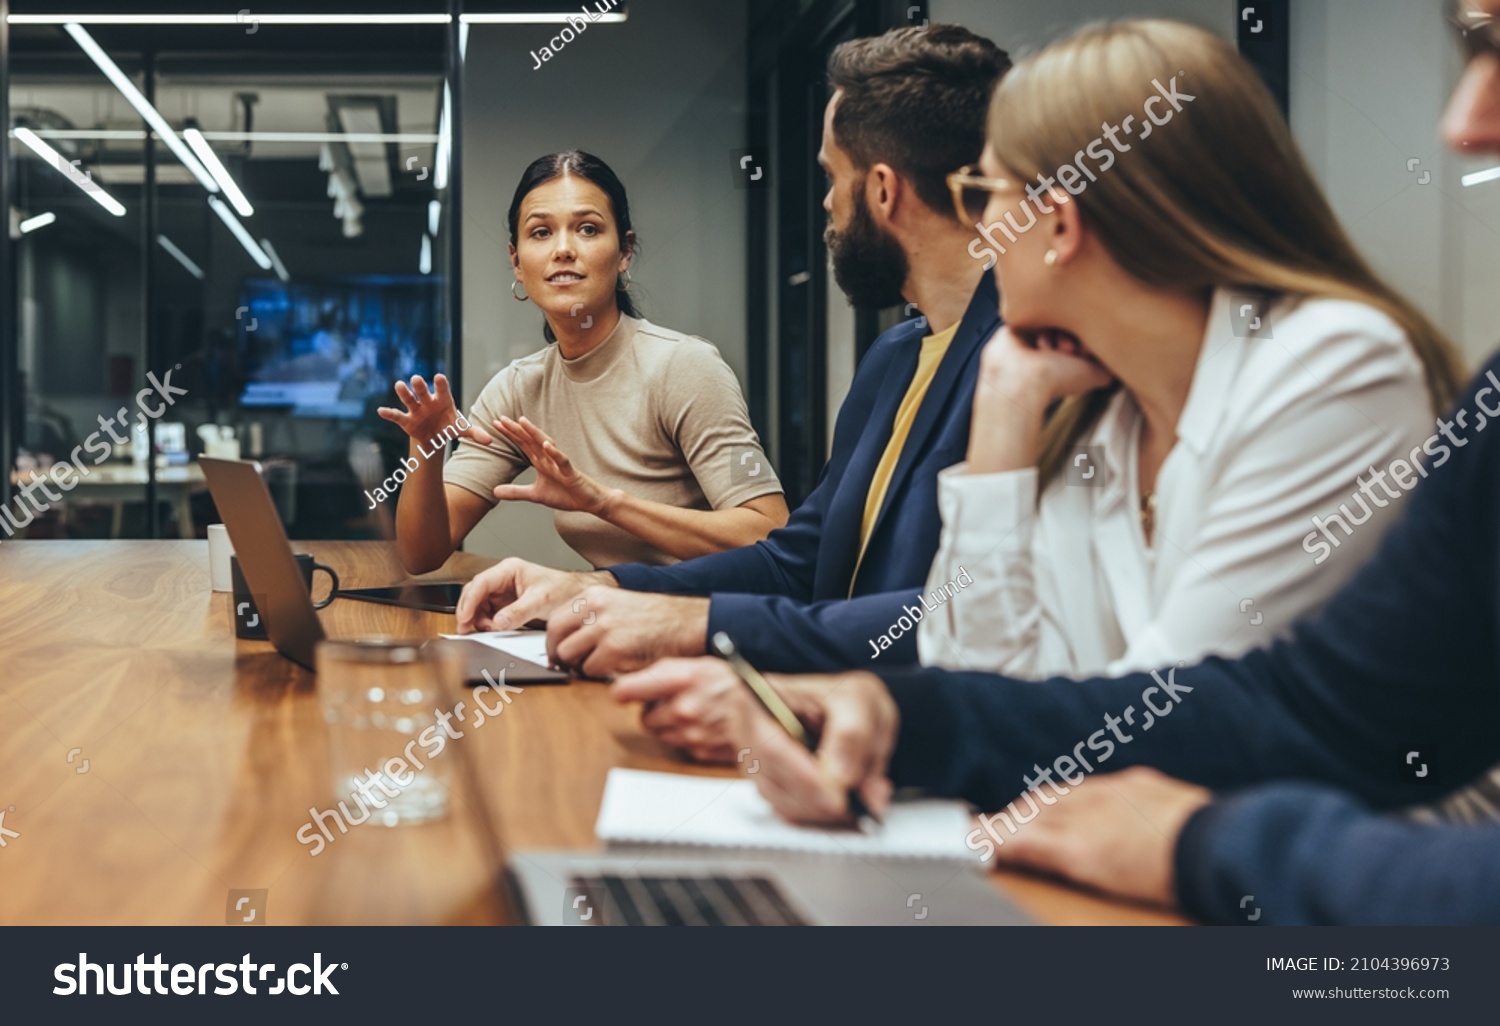 Young businesswoman leading a discussion during a meeting with her colleagues. Group of diverse businesspeople working together in a modern workplace. Business colleagues collaborating on a project. #2104396973